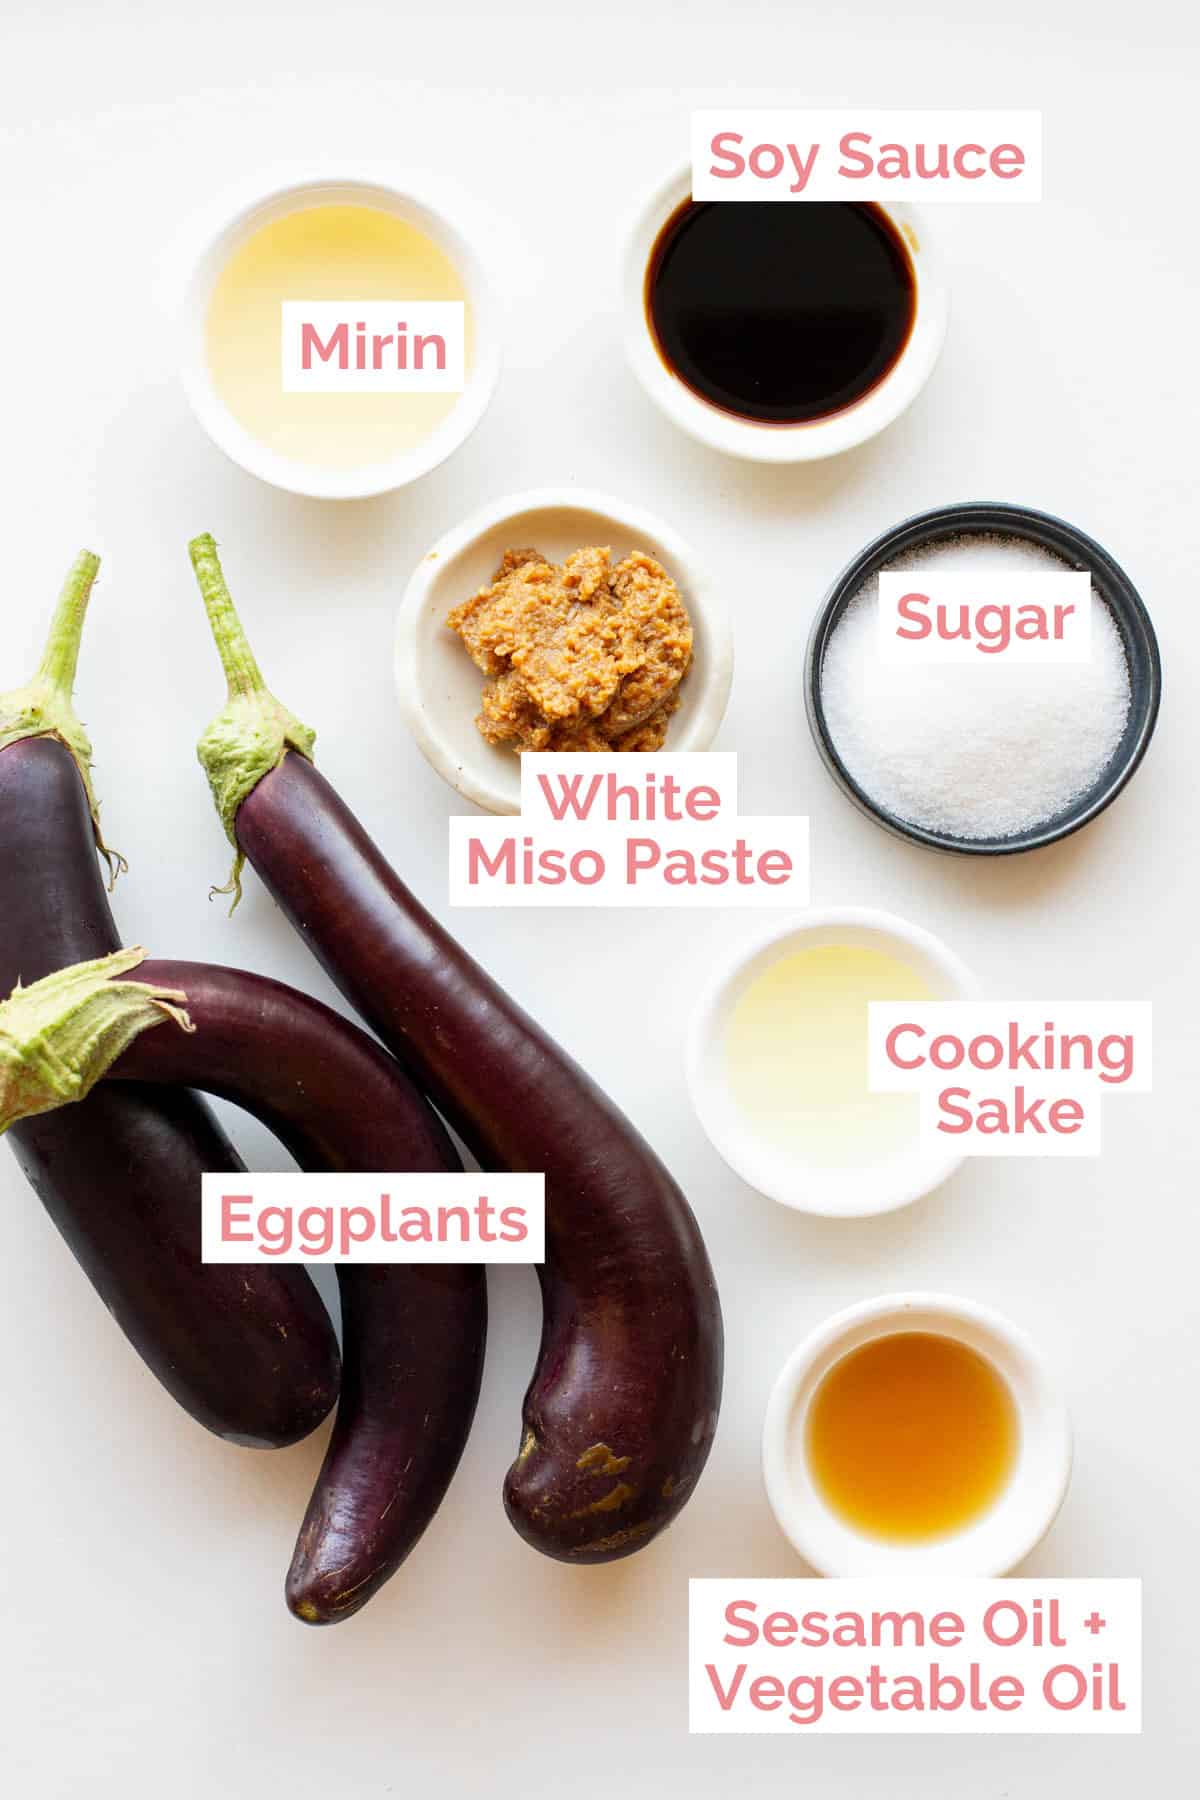 Ingredients laid out ready to make Japanese miso glazed eggplant.